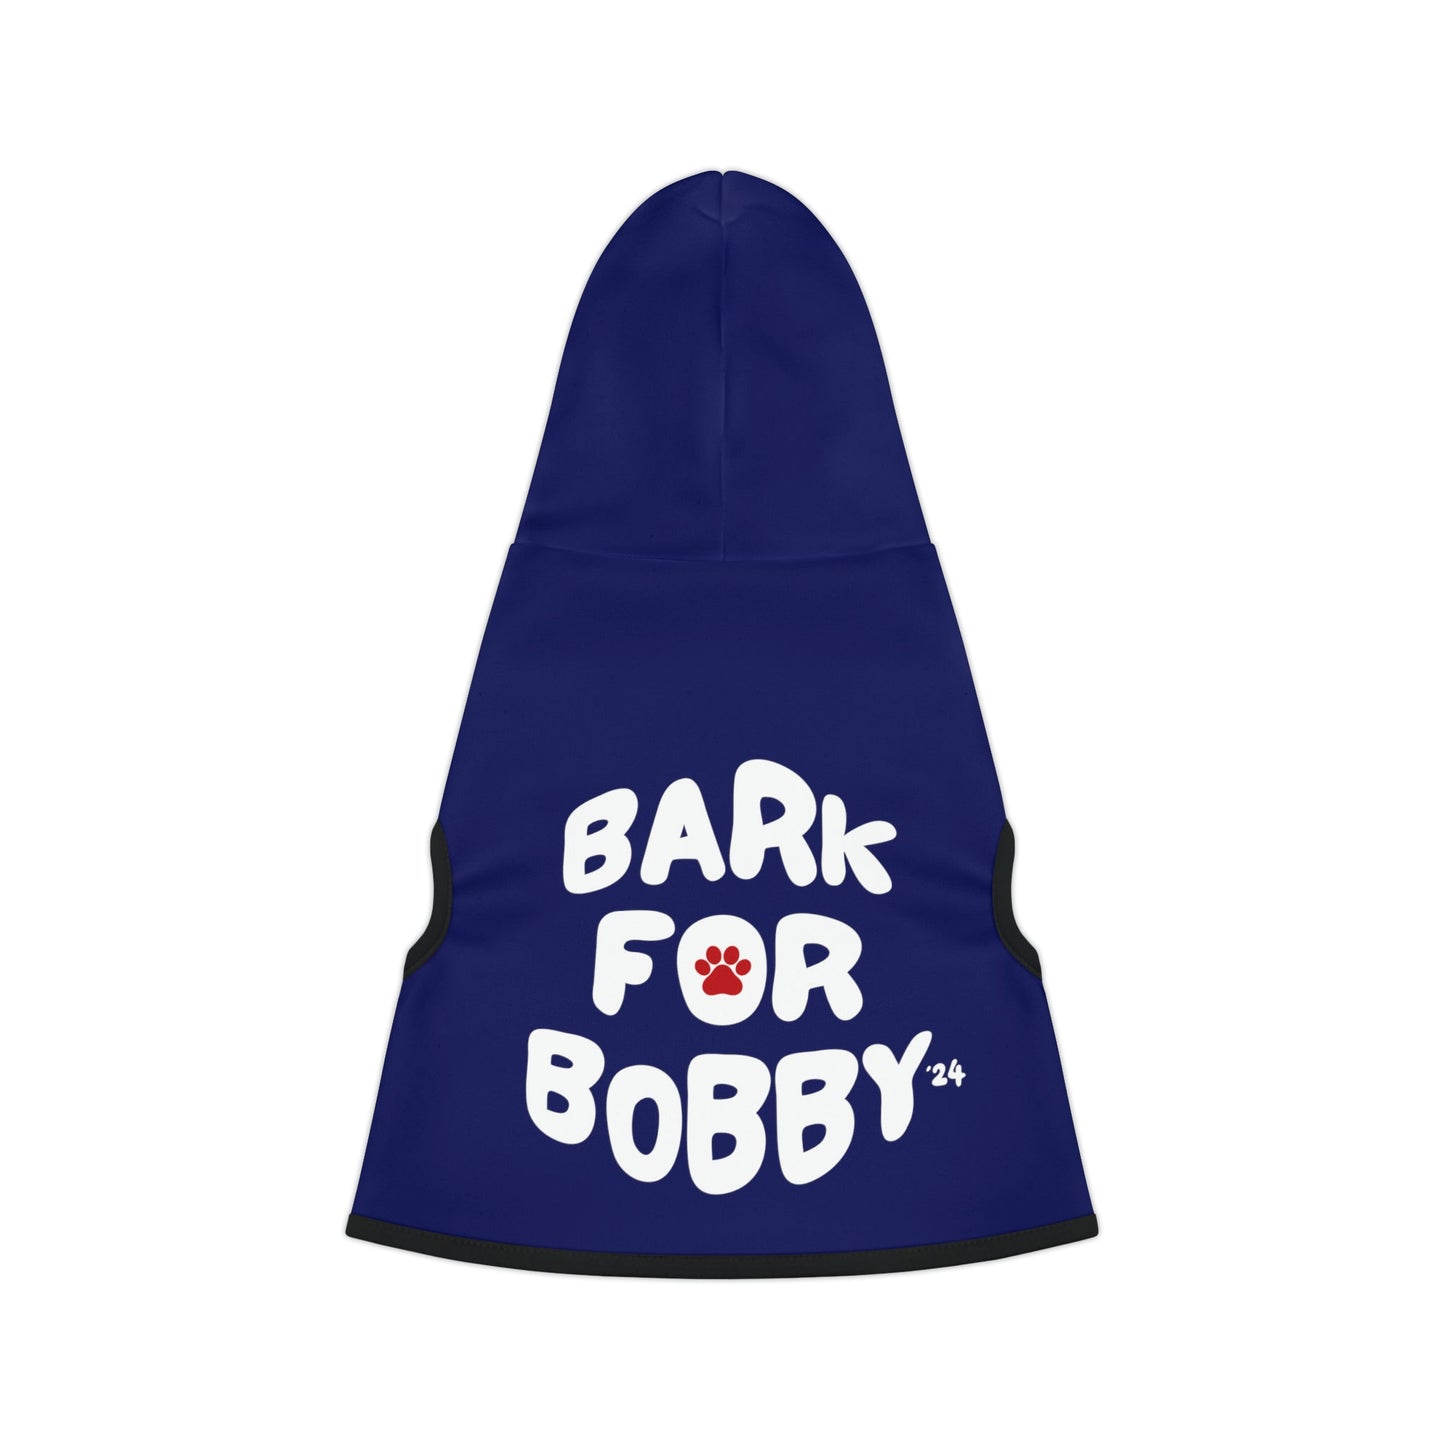 Bark for Bobby Pet Hoodie Navy - TEAM KENNEDY. All rights reserved